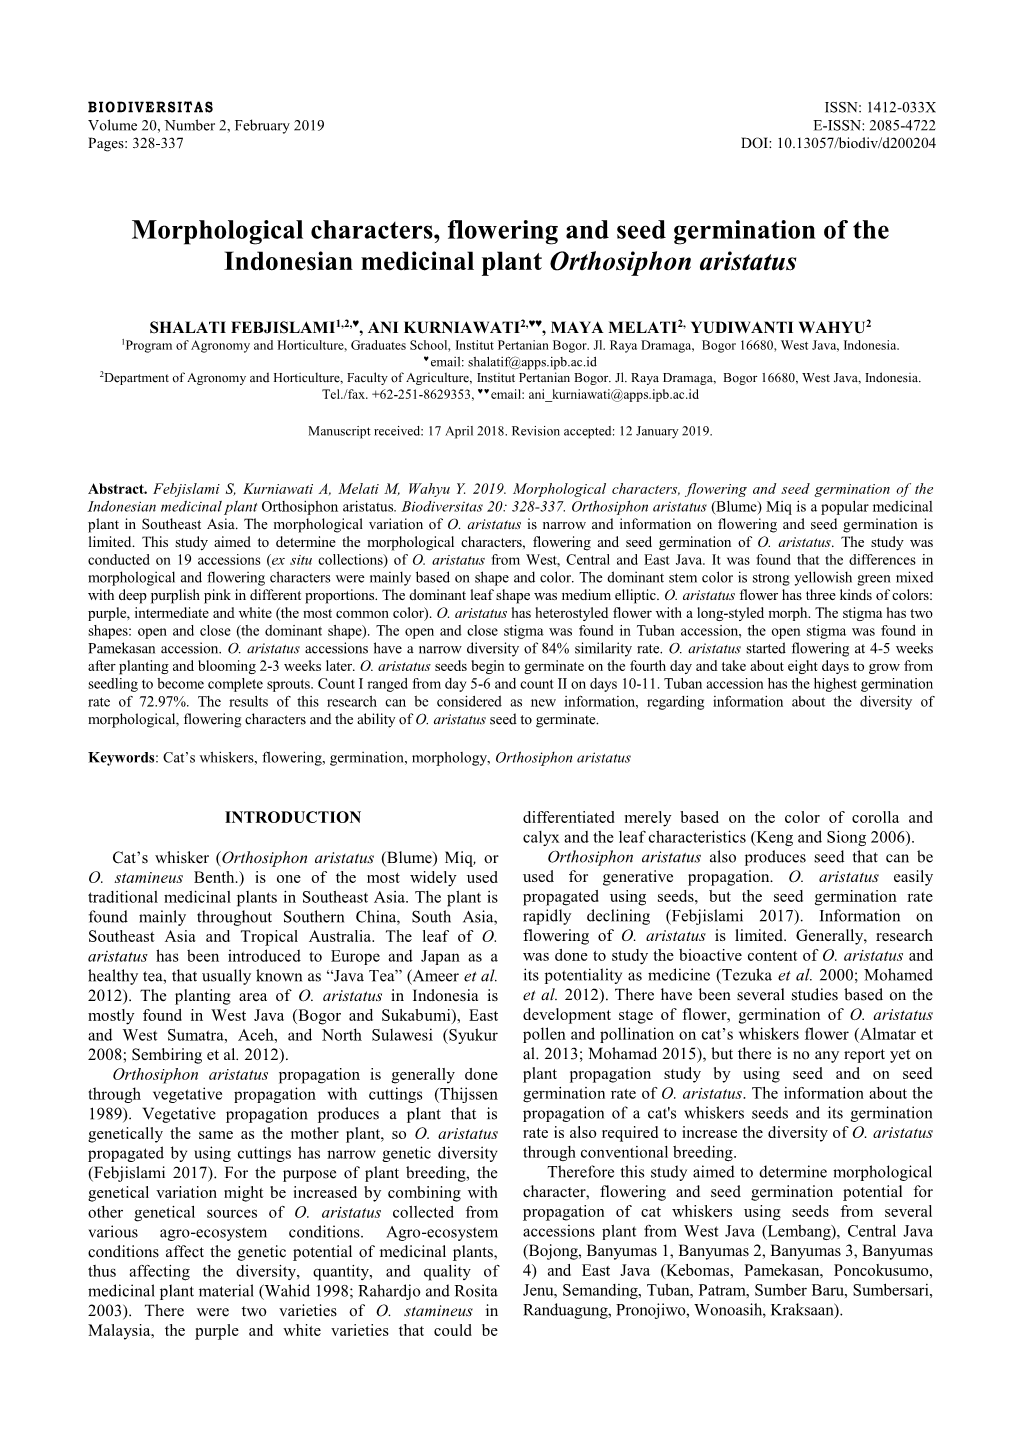 Morphological Characters, Flowering and Seed Germination of the Indonesian Medicinal Plant Orthosiphon Aristatus